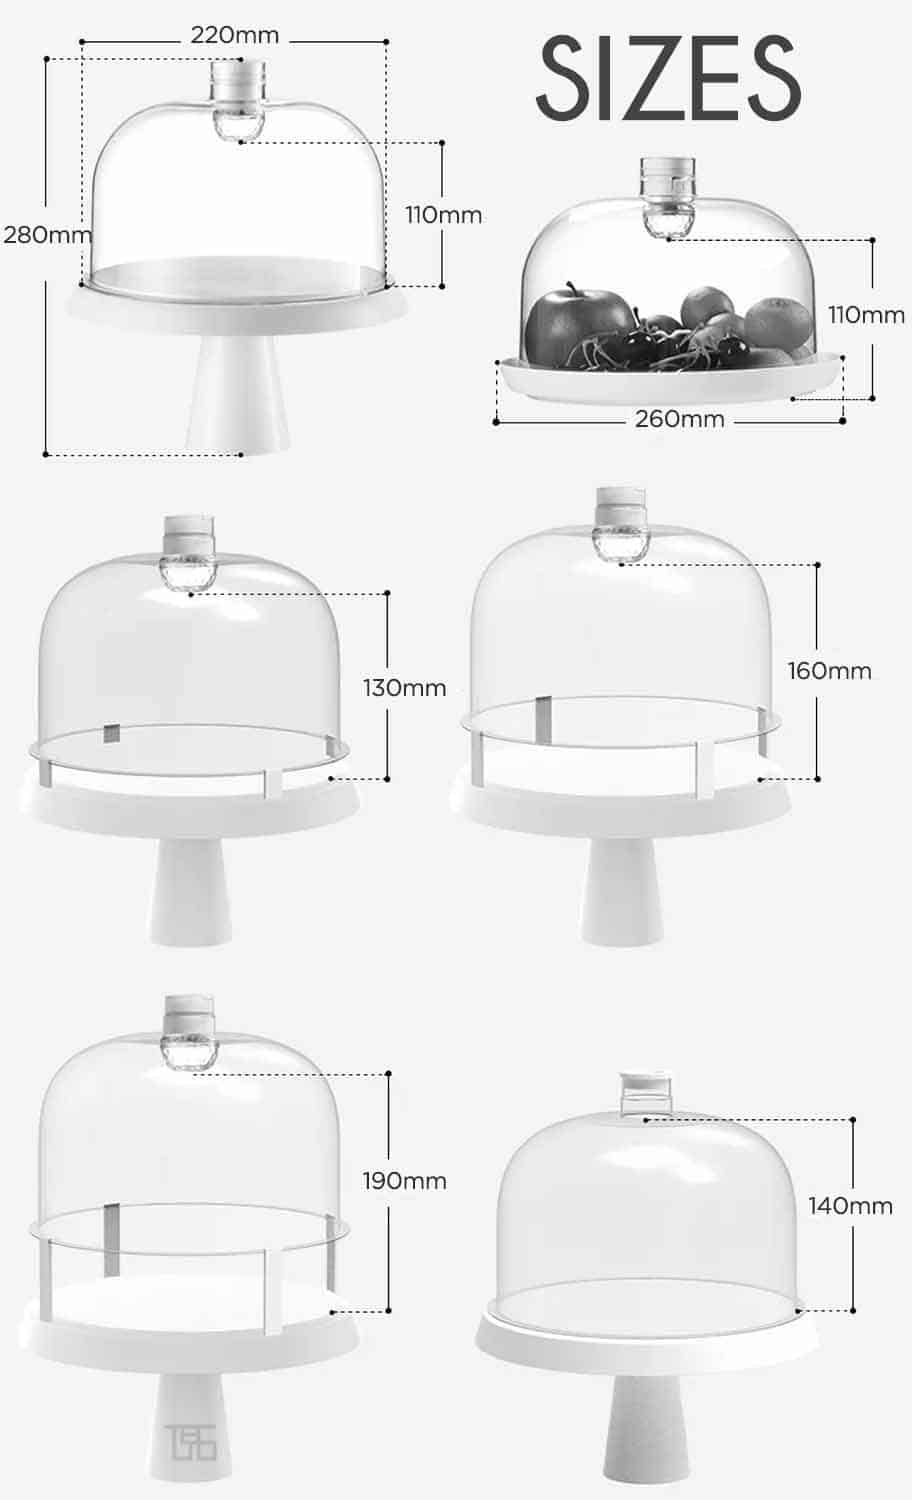 The Party Cake Dome Sizes